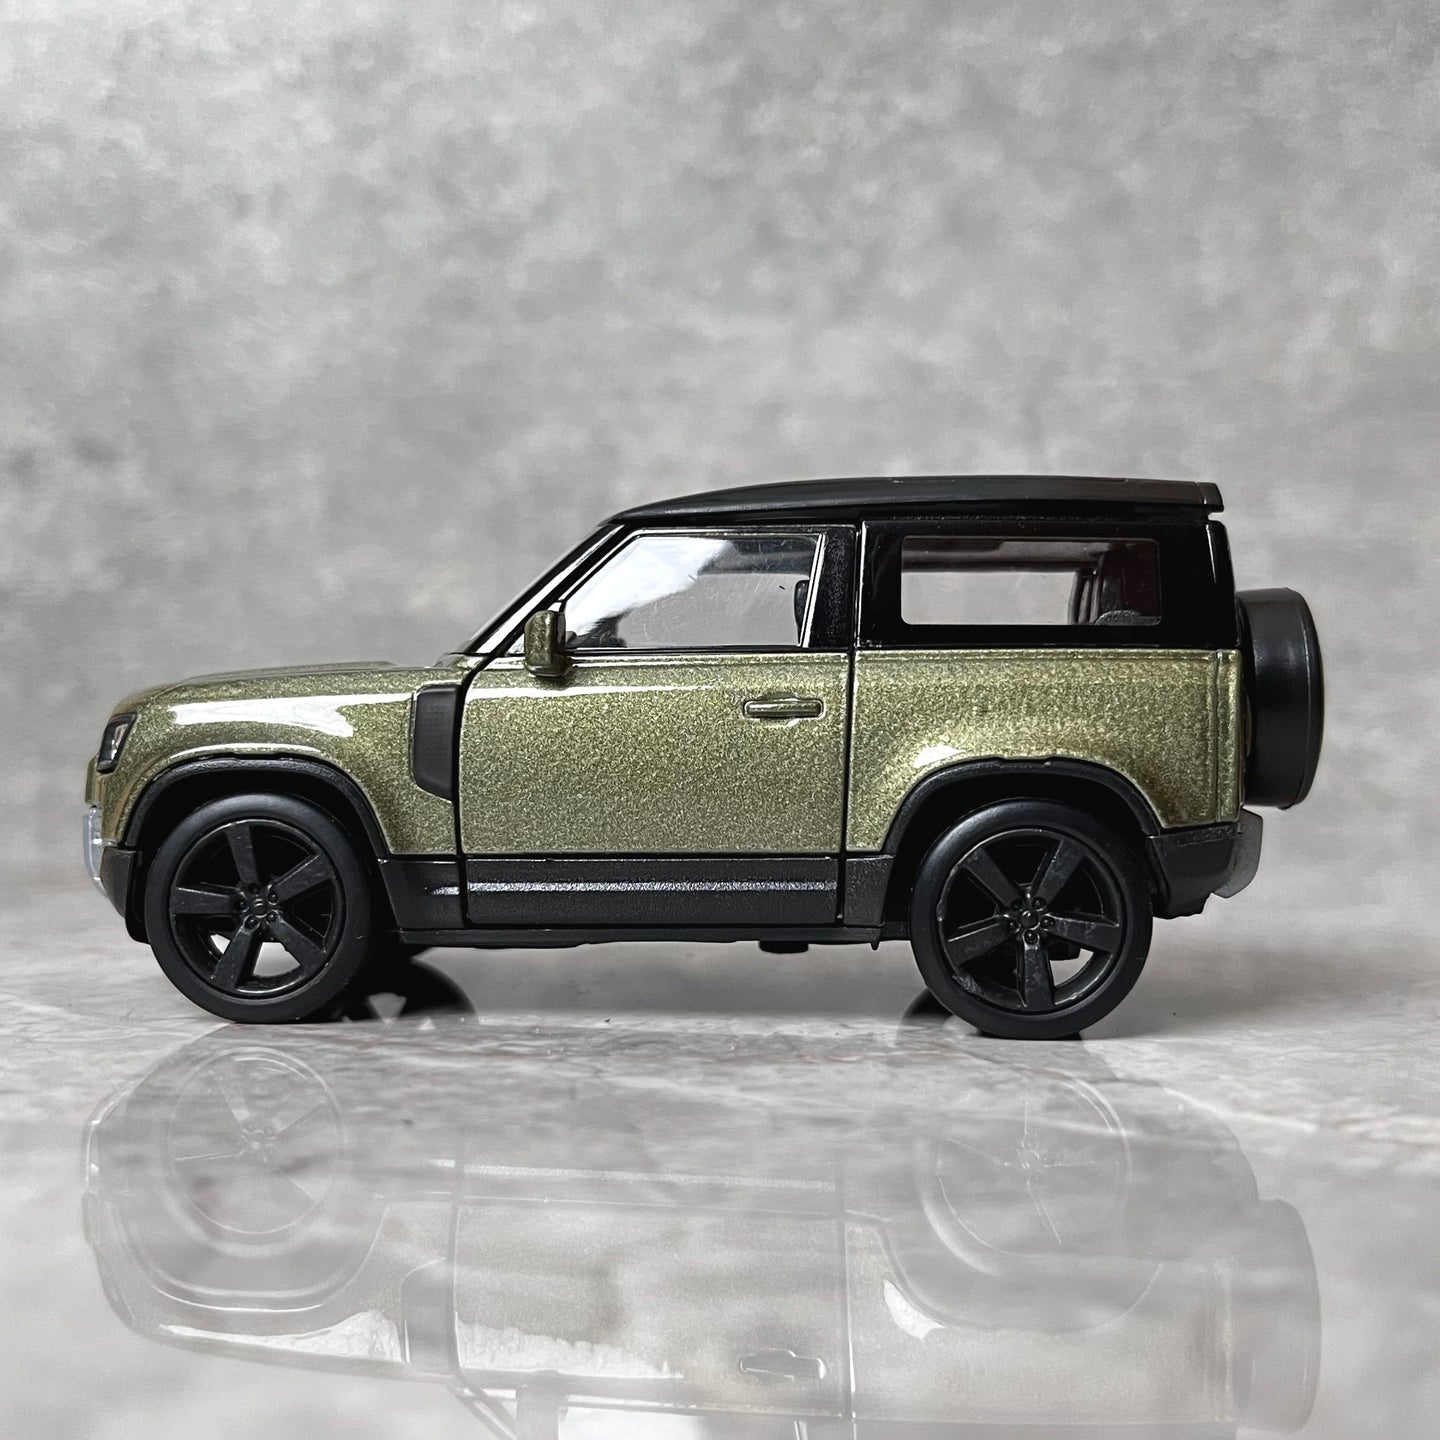 1:36 Land Rover Defender Diecast Car Model By Welly